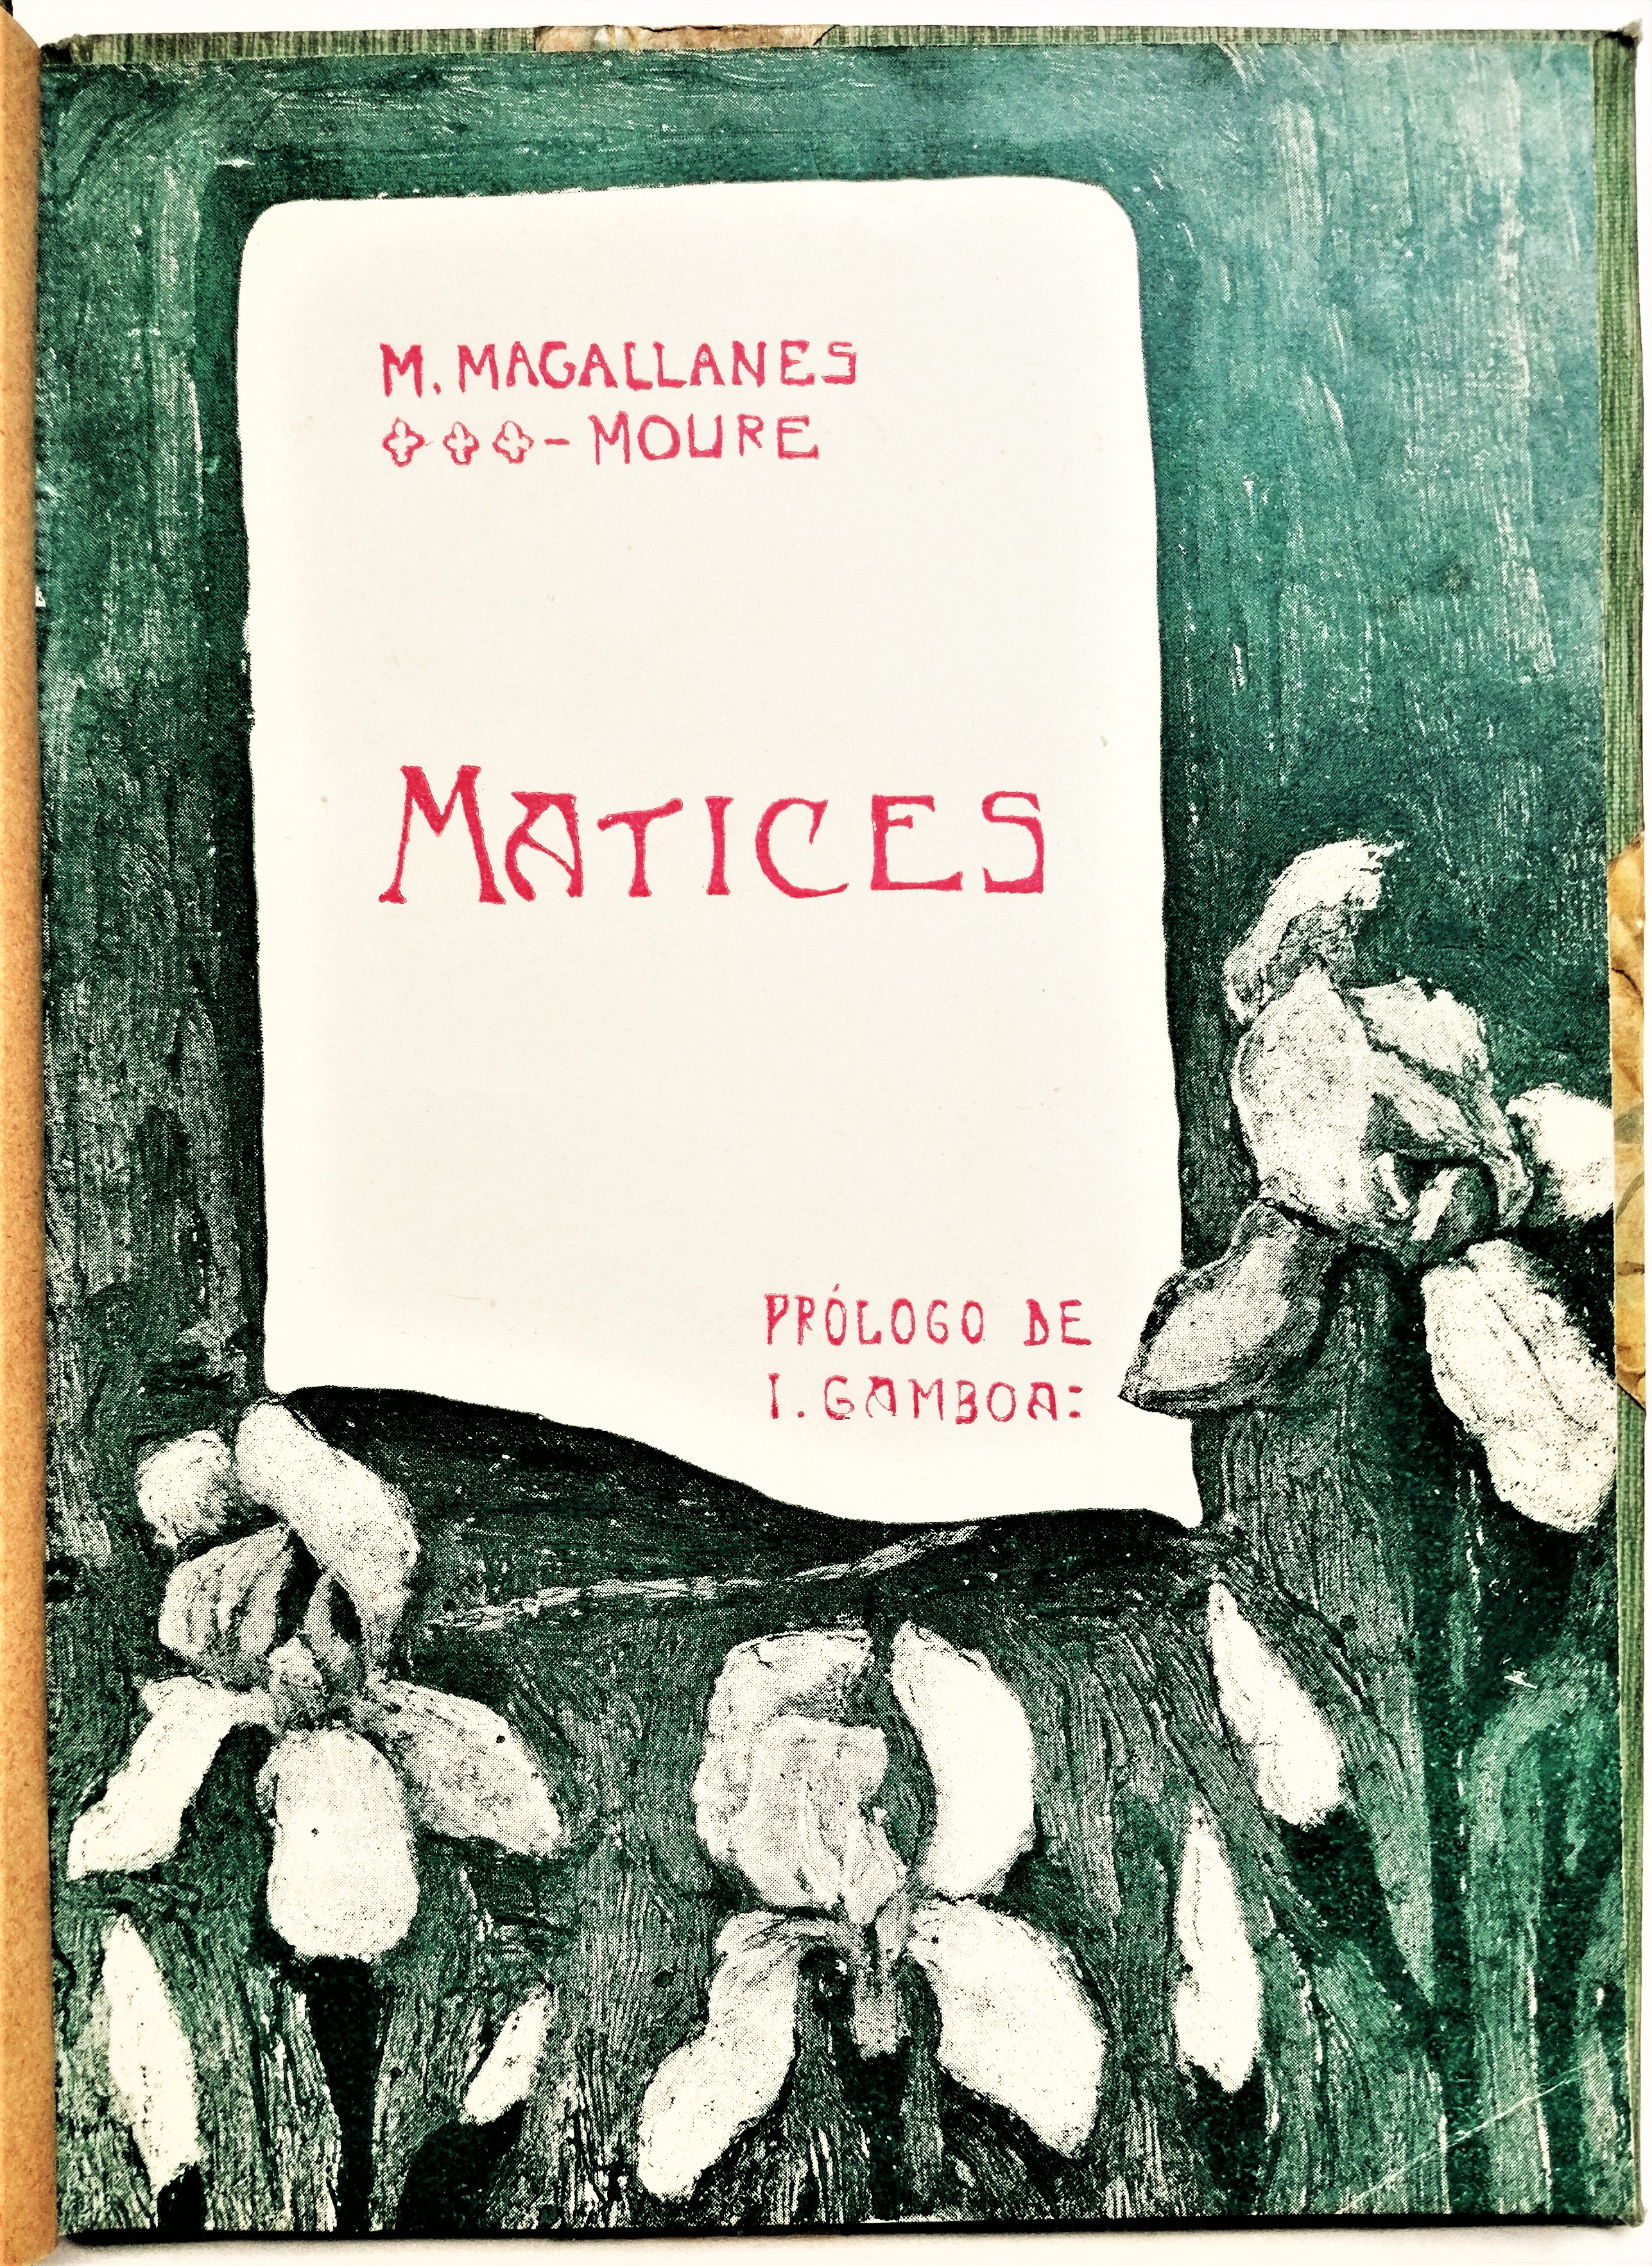 M. Magallanes Moure - Matices